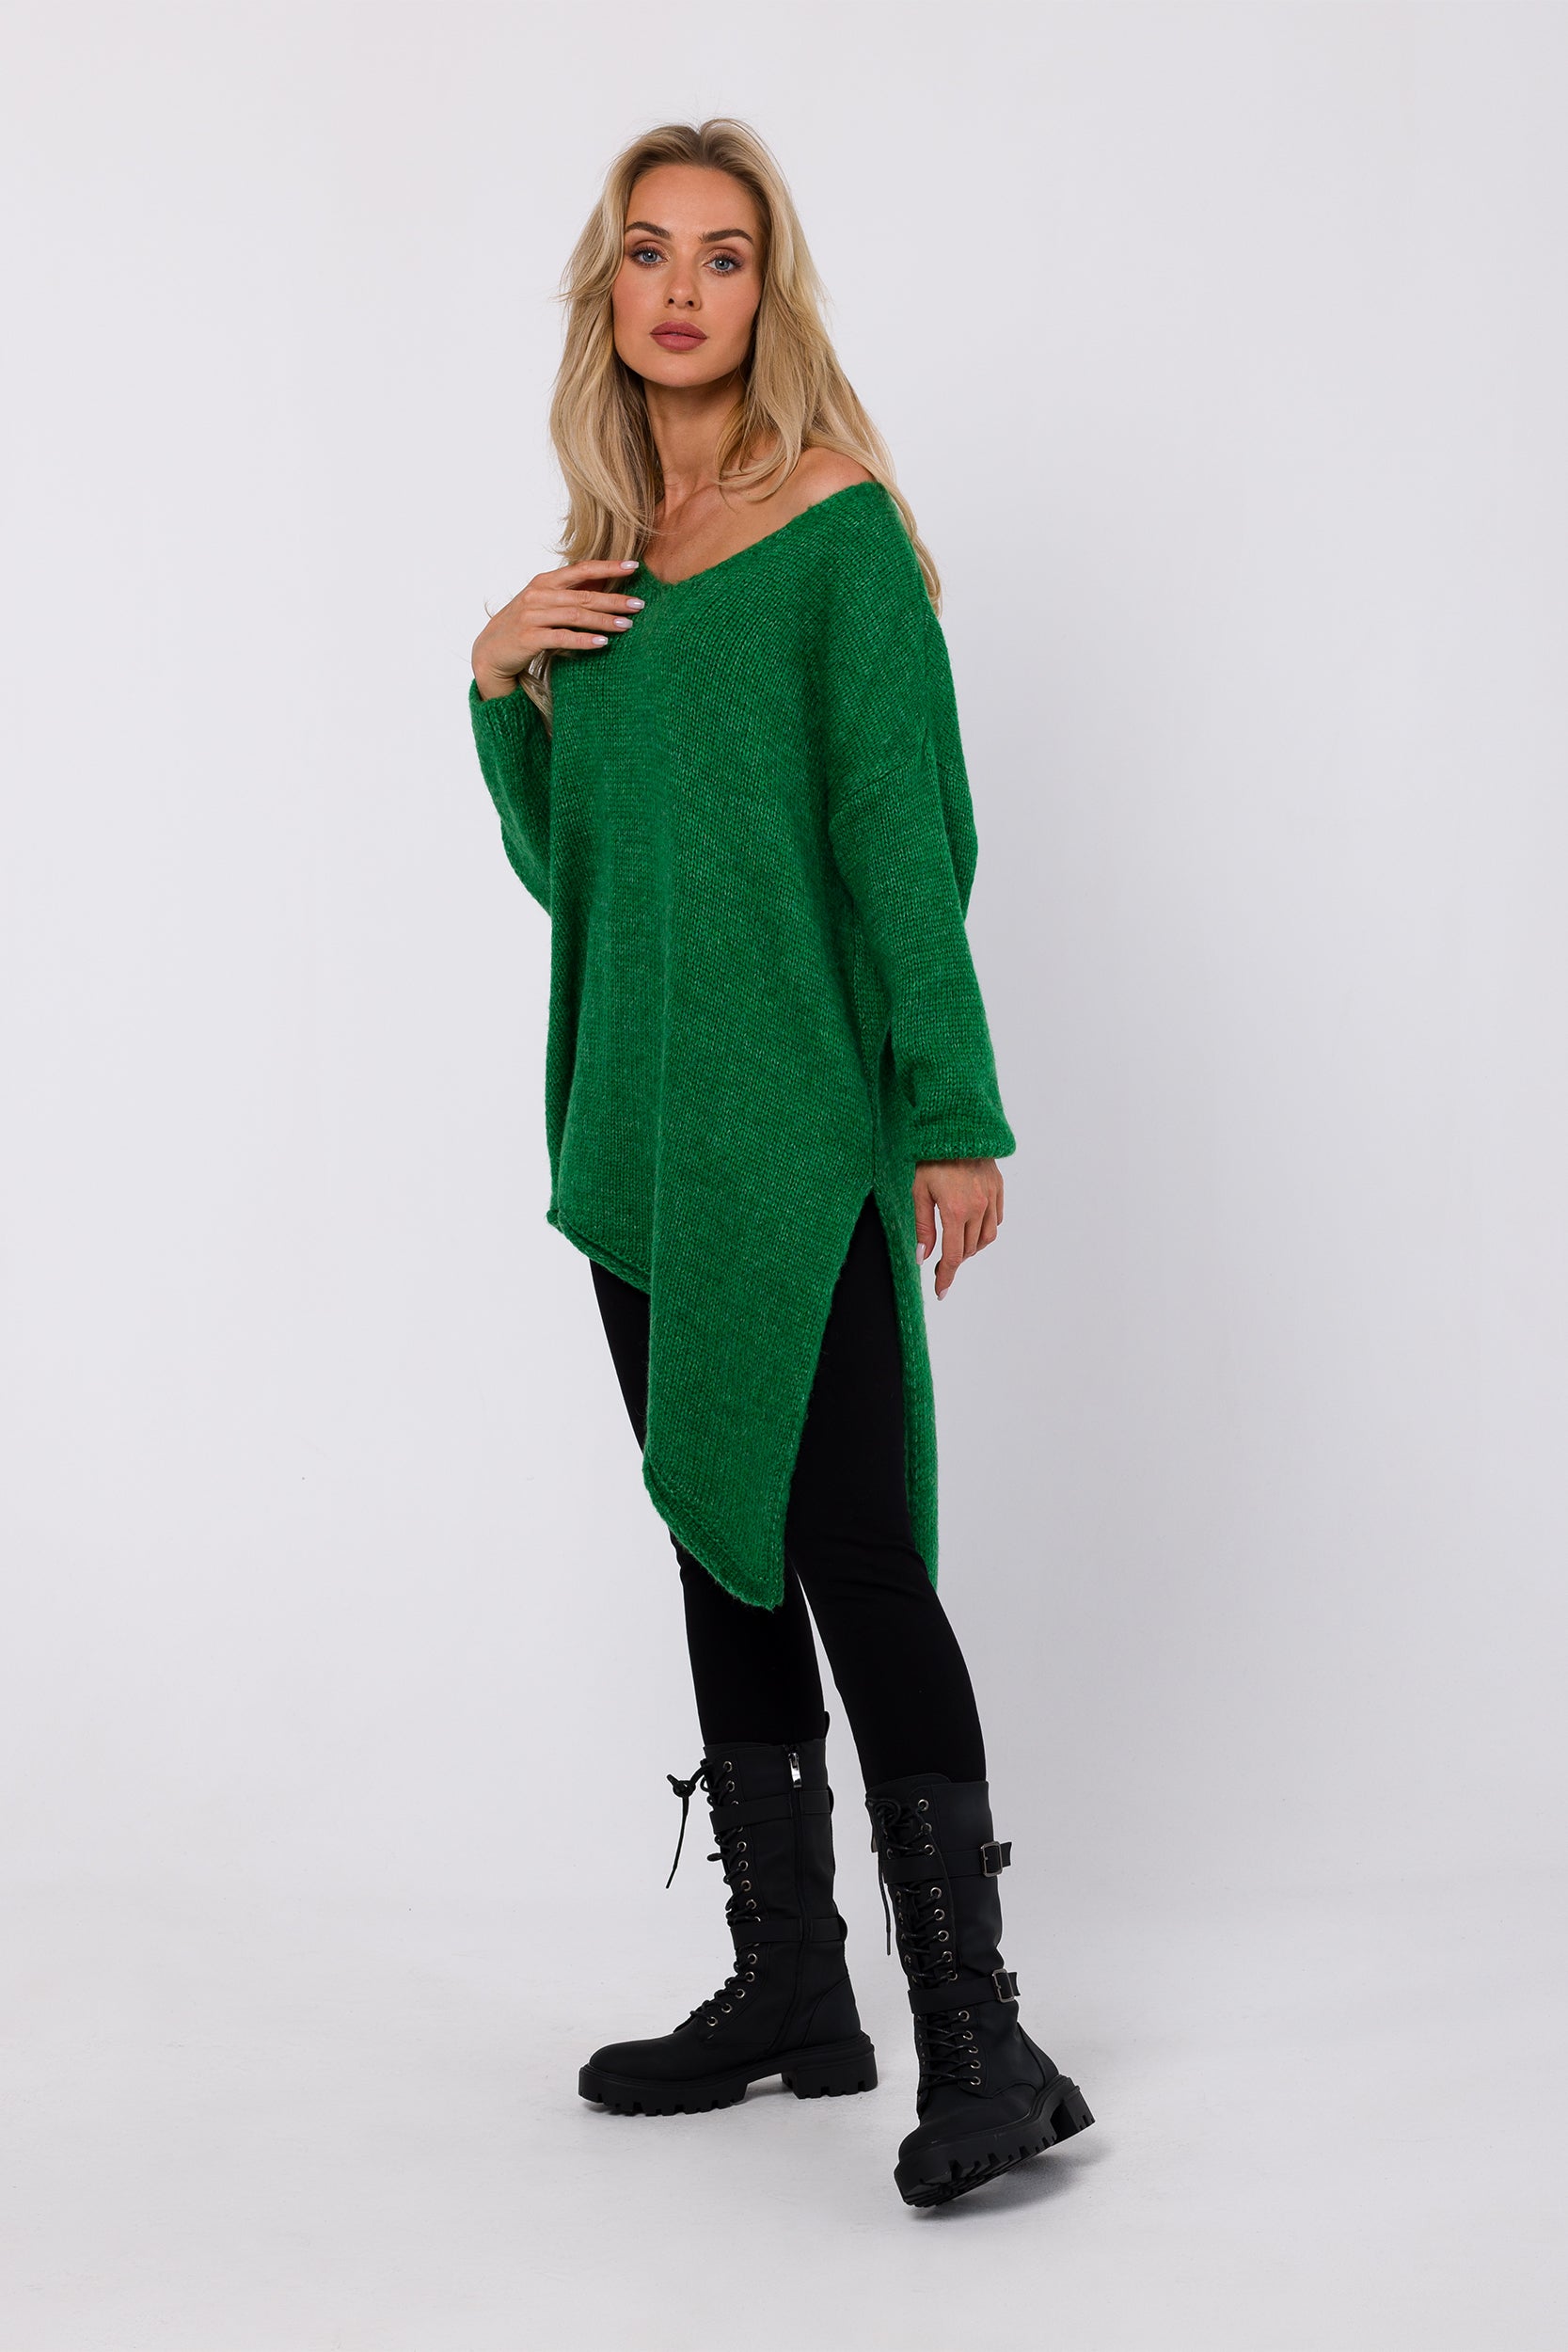 Experience the perfect blend of comfort and style with our Relaxed Fit Sweater Asymmetric. Crafted from open chunky knit, it boasts a relaxed fit with an asymmetric bottom hem and side split for modern flair. The long sleeves and deep V-shaped neckline add warmth and allure. This versatile piece can be worn as a classic pullover or transformed into a one-shoulder statement, making it a must-have for your winter wardrobe.